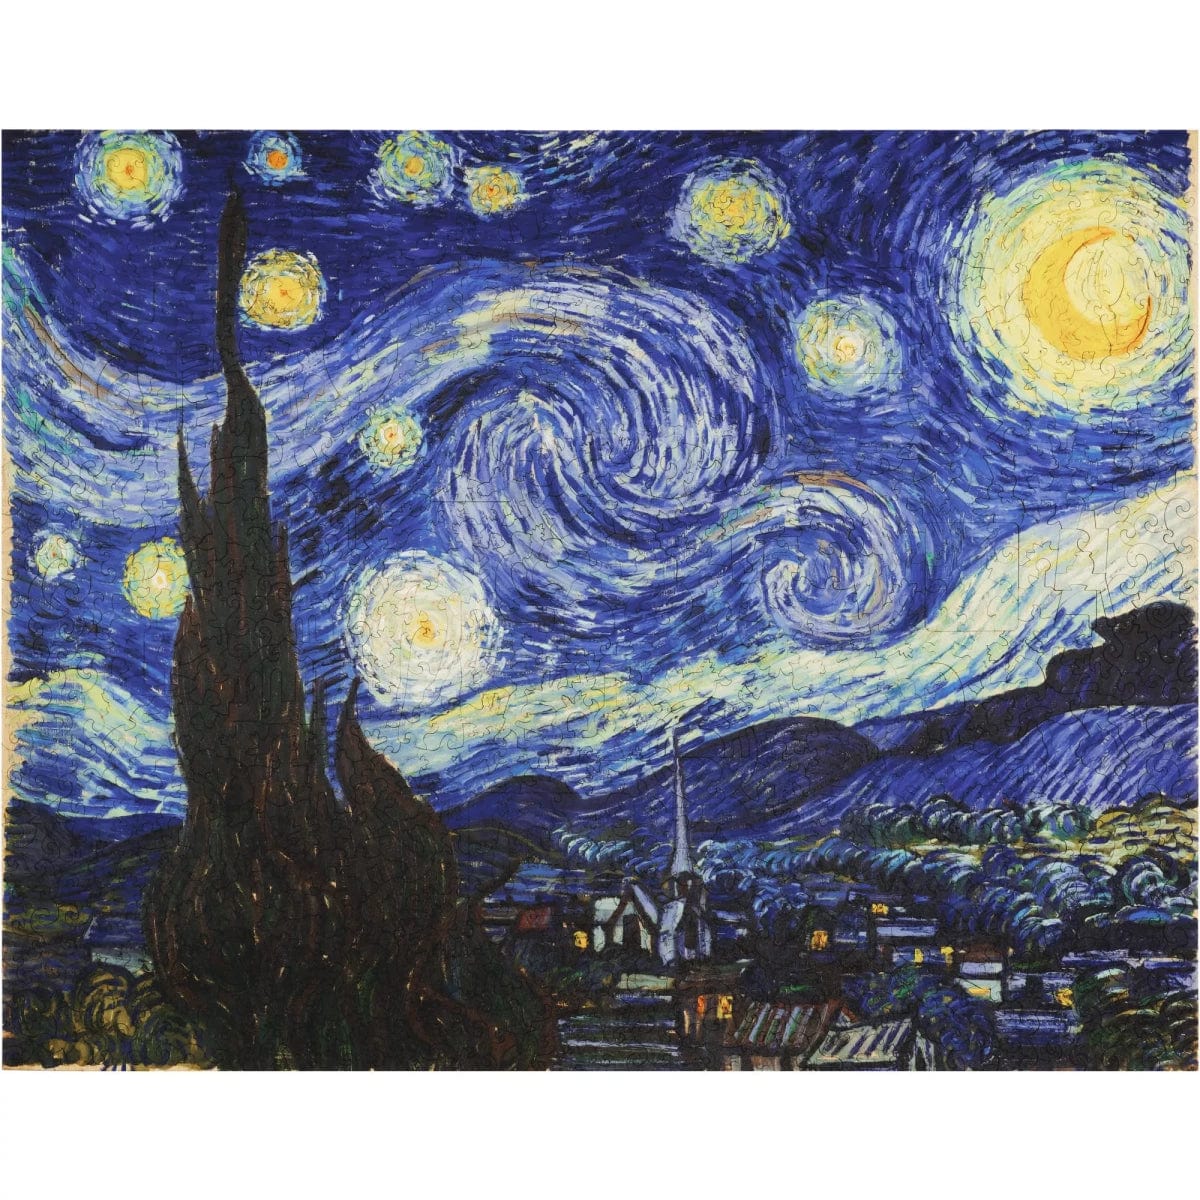 Unidragon-The Starry Night Wooden Puzzle - 1,000 Pieces-UNI-STAR-Legacy Toys